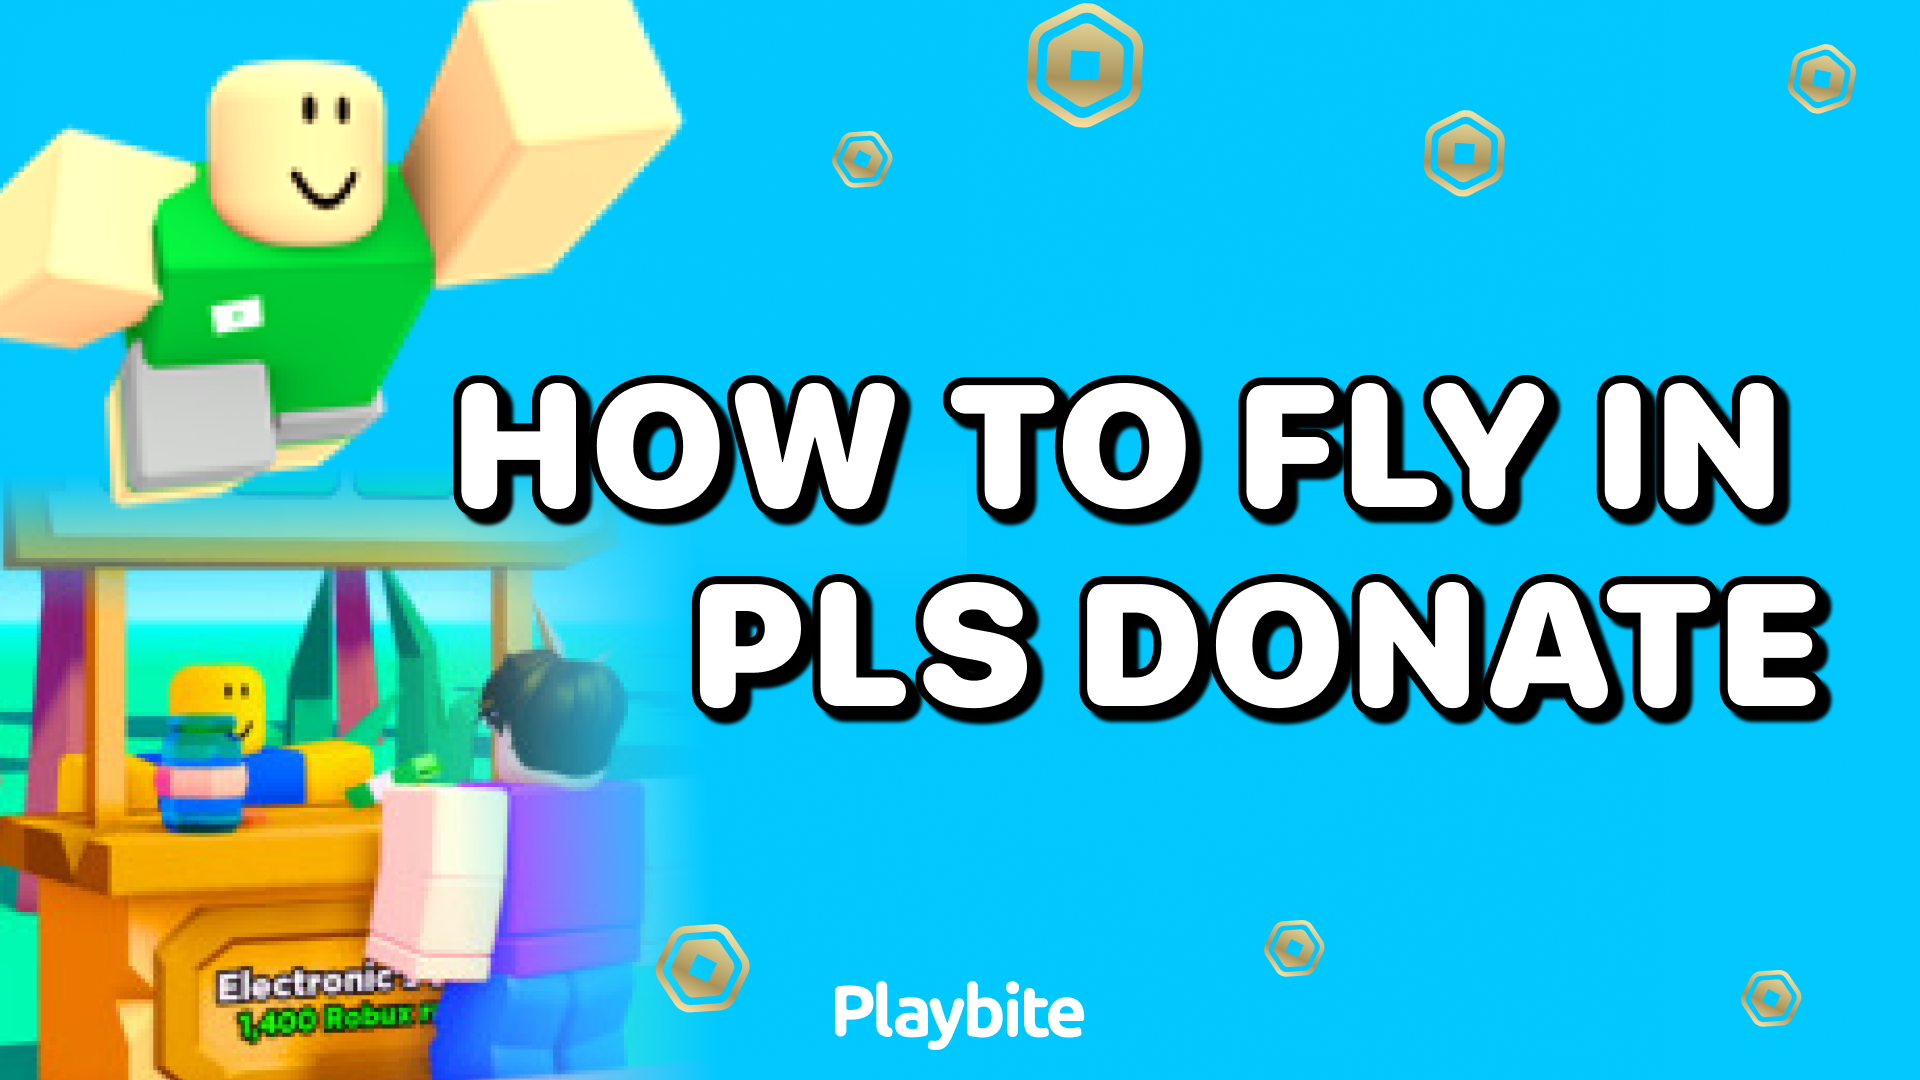 How To Fly In PLS DONATE